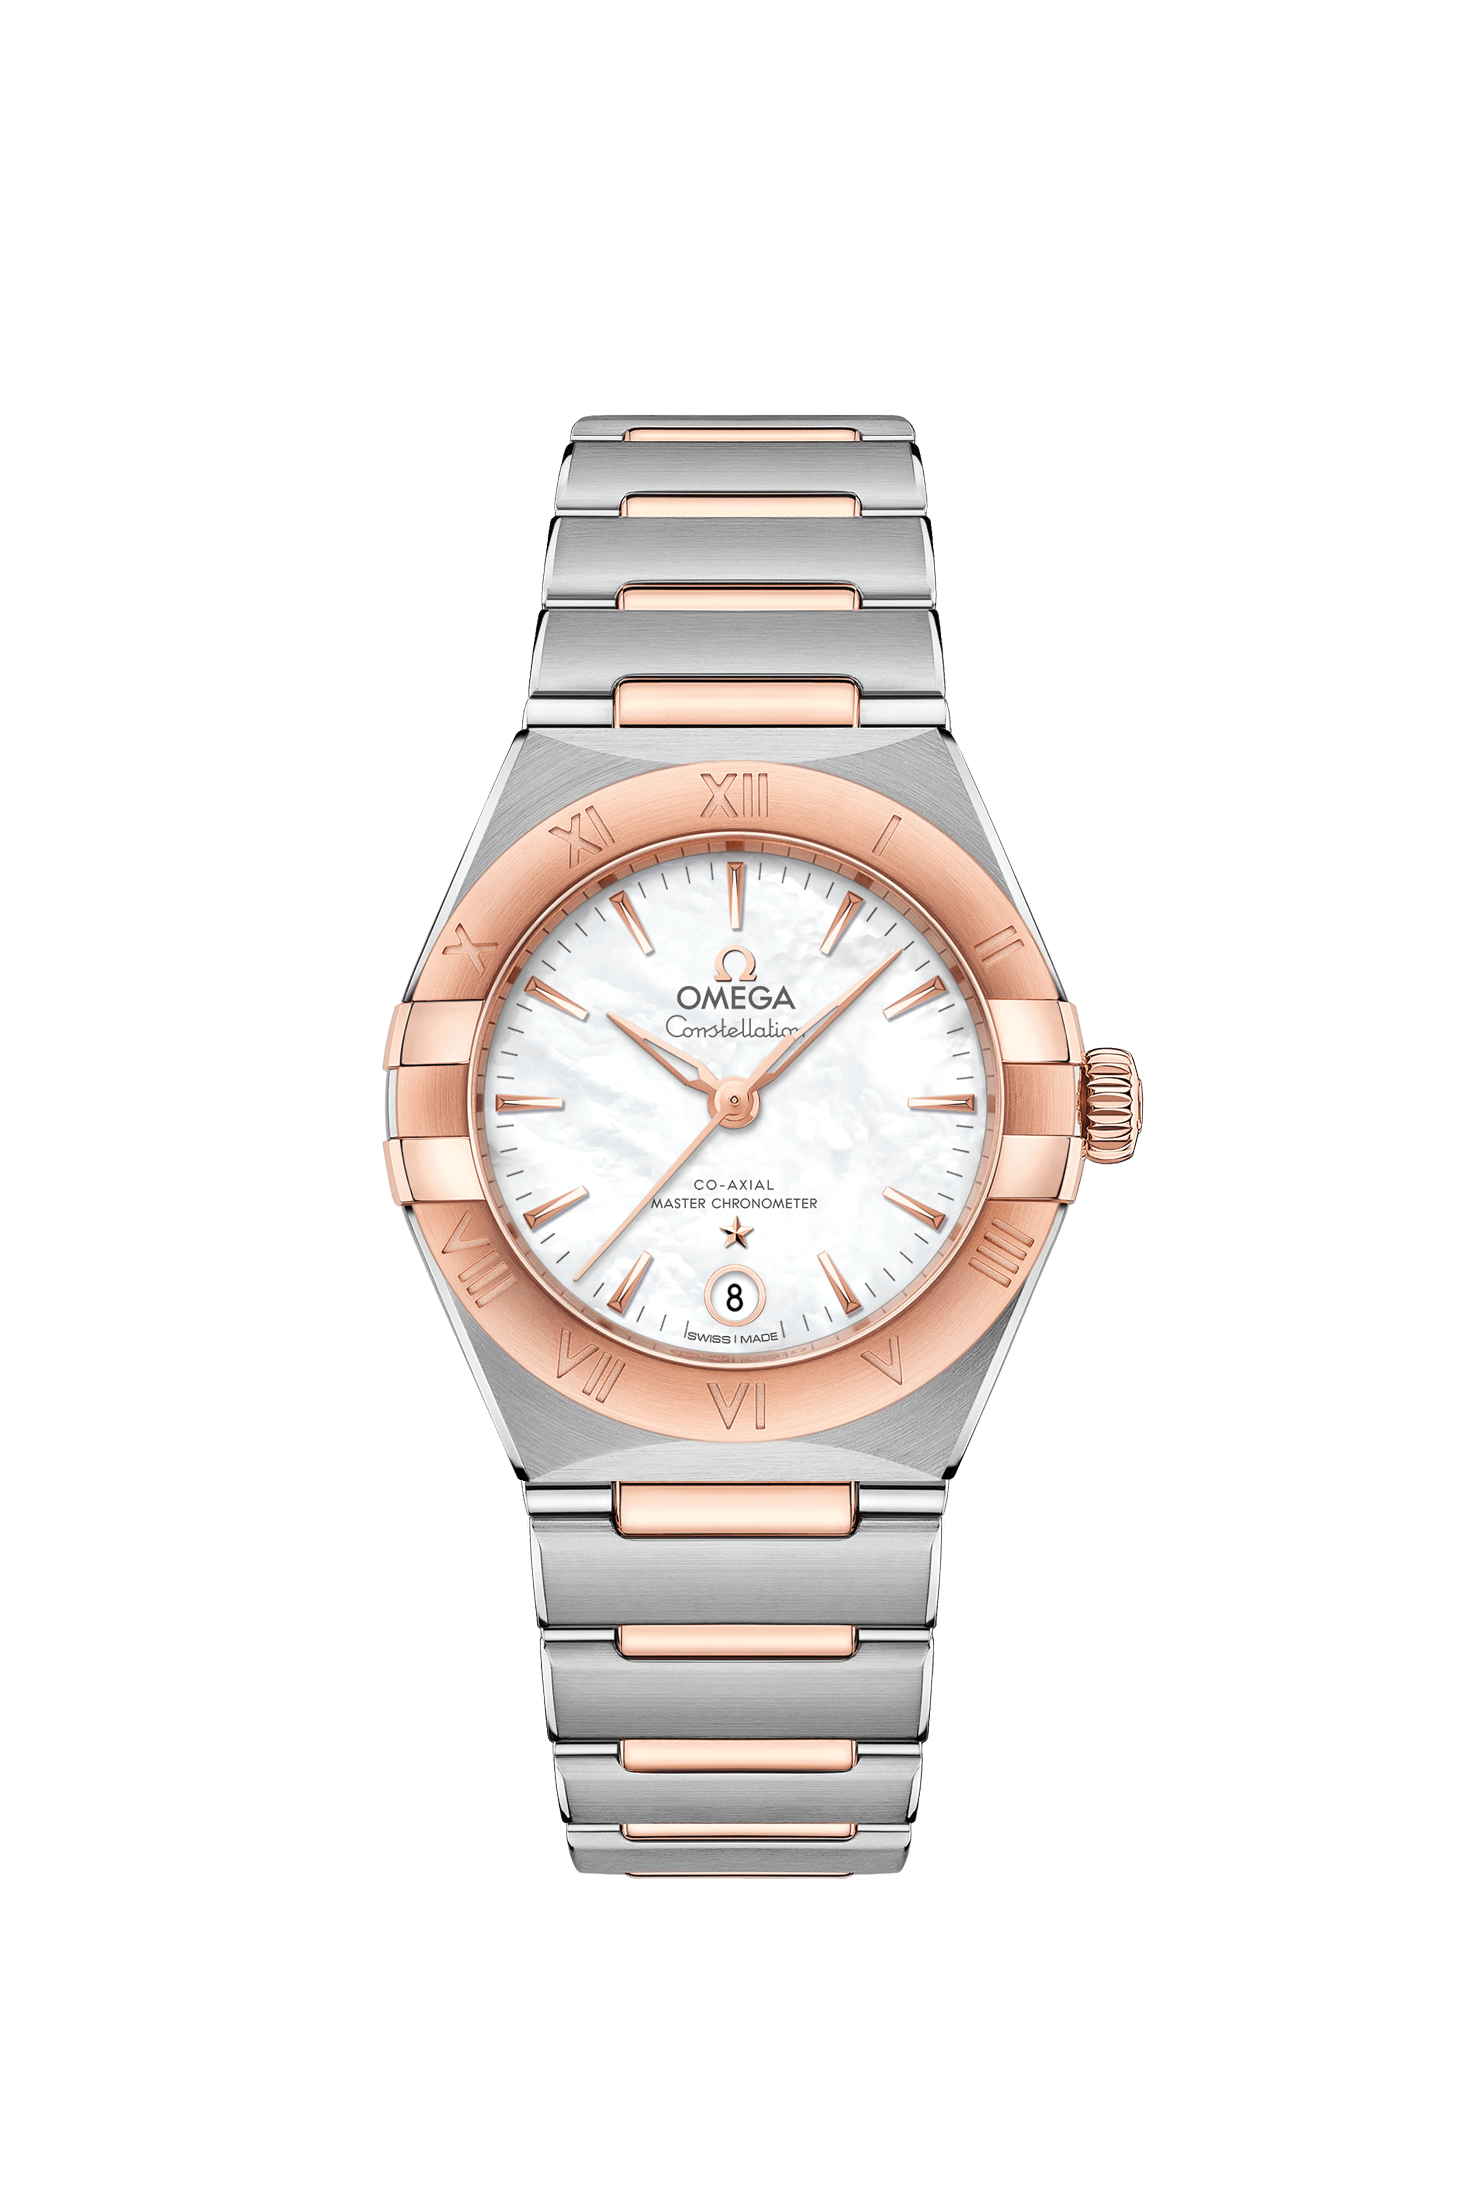 Ladies' watch  OMEGA, Constellation Co Axial Master Chronometer / 29mm, SKU: 131.20.29.20.05.001 | watchphilosophy.co.uk